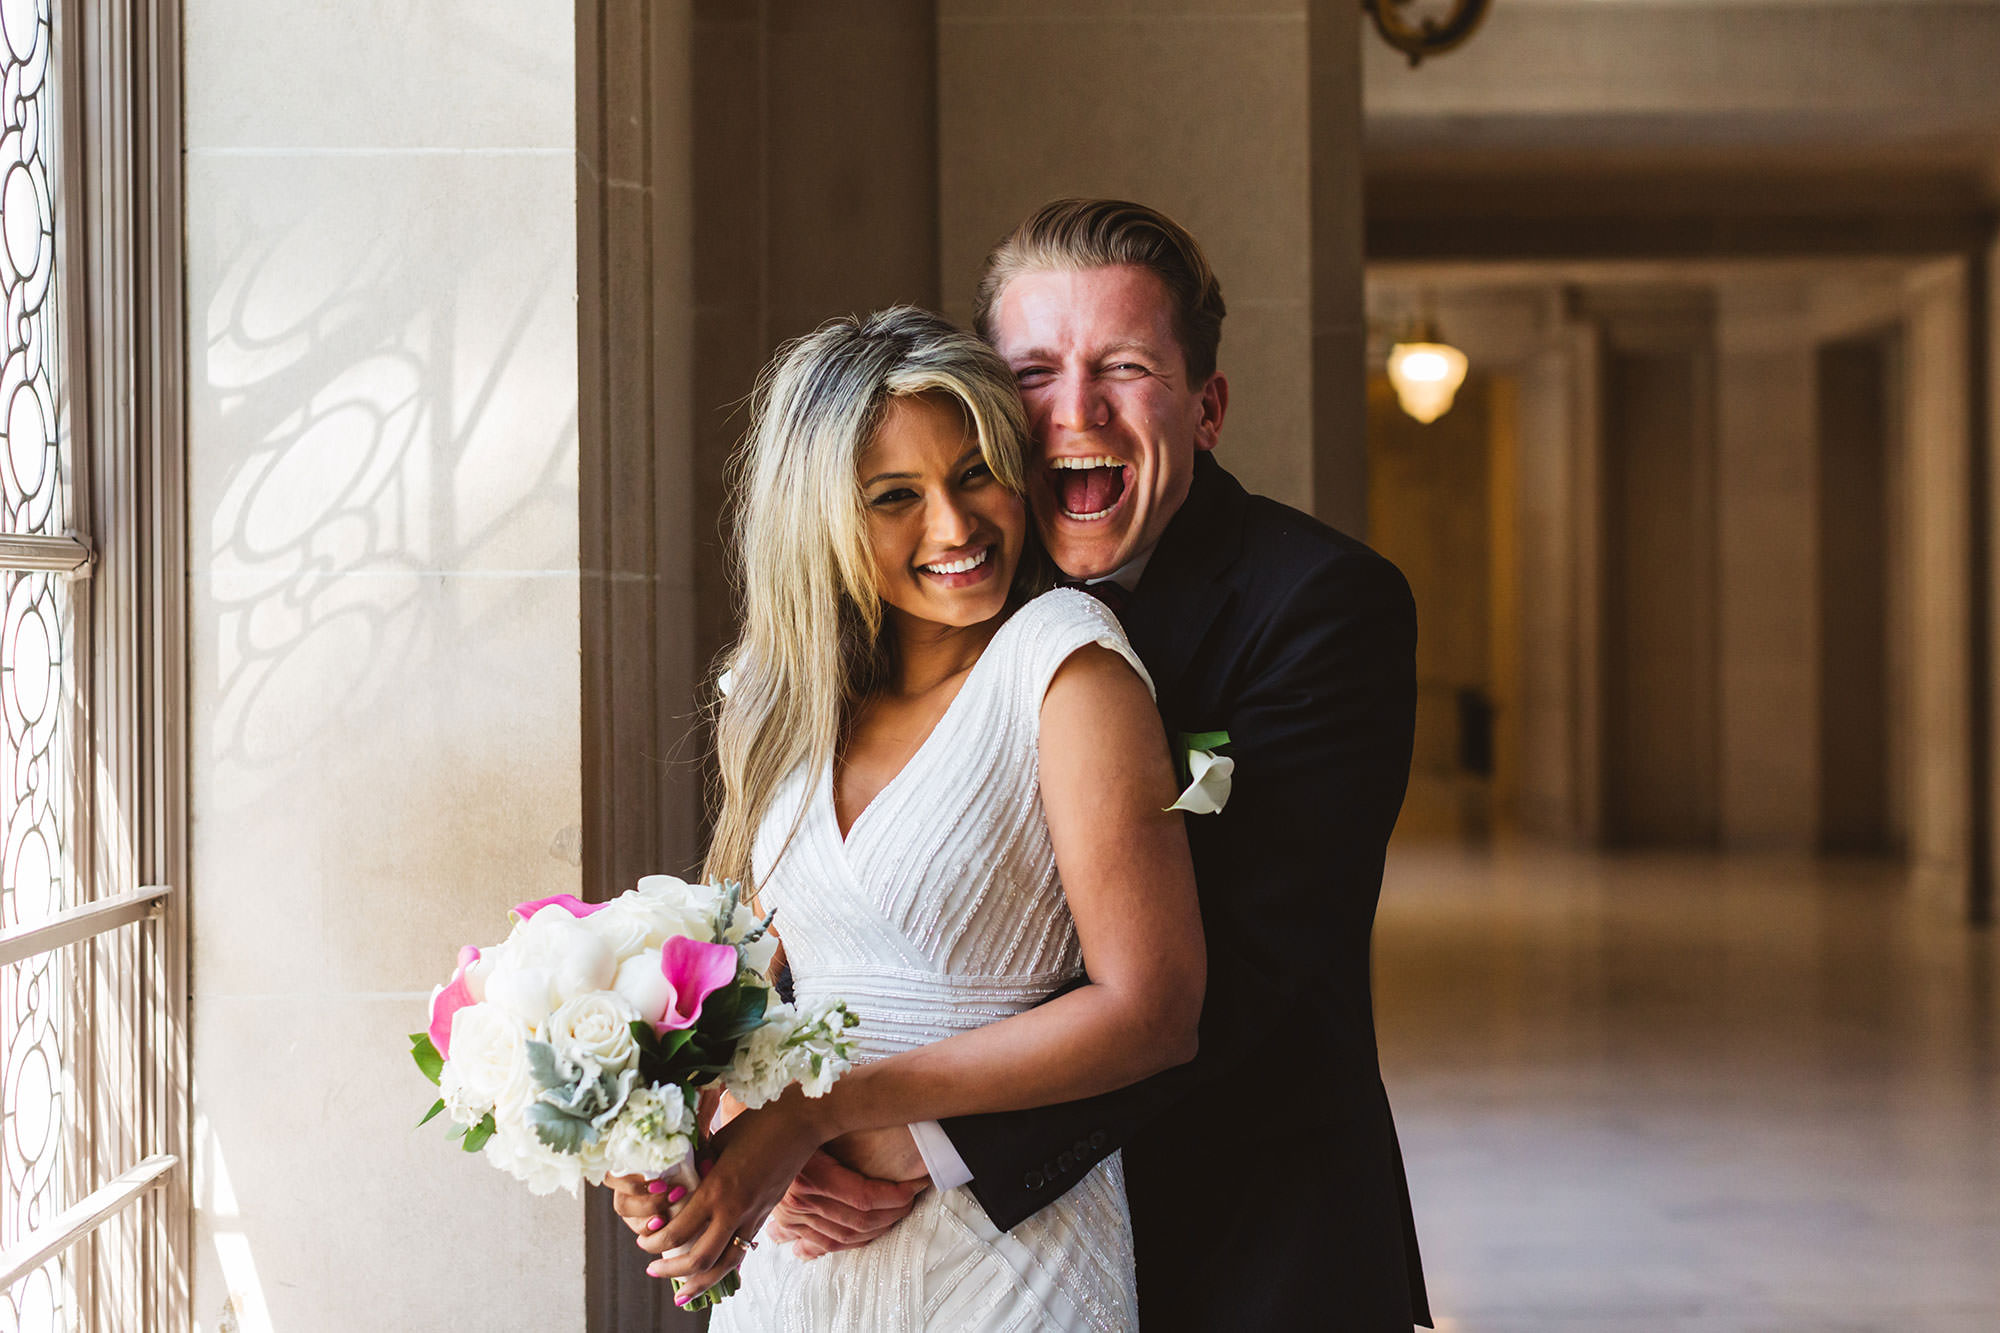 Plan your timeline for your San Francisco City Hall wedding ceremony